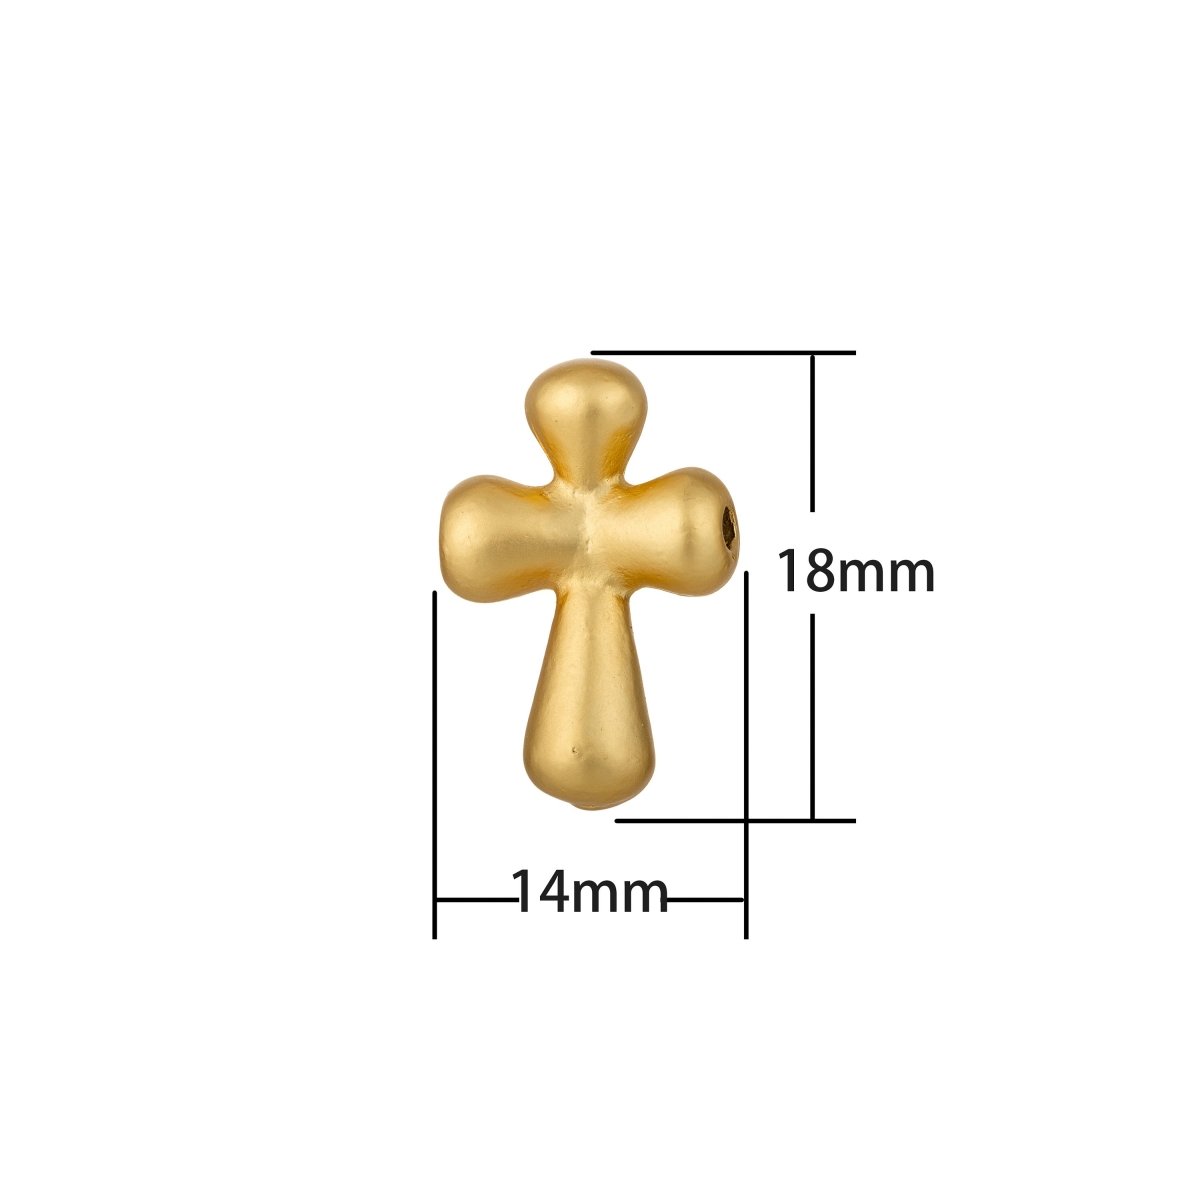 2 Piece - Tiny Cross Charm - 14x18mm Small Beads Pendant - Small Gold Cross Connector Bead Spacer Black Silver Cross Charm for Bracelet, SUPP-63/K-63 - DLUXCA